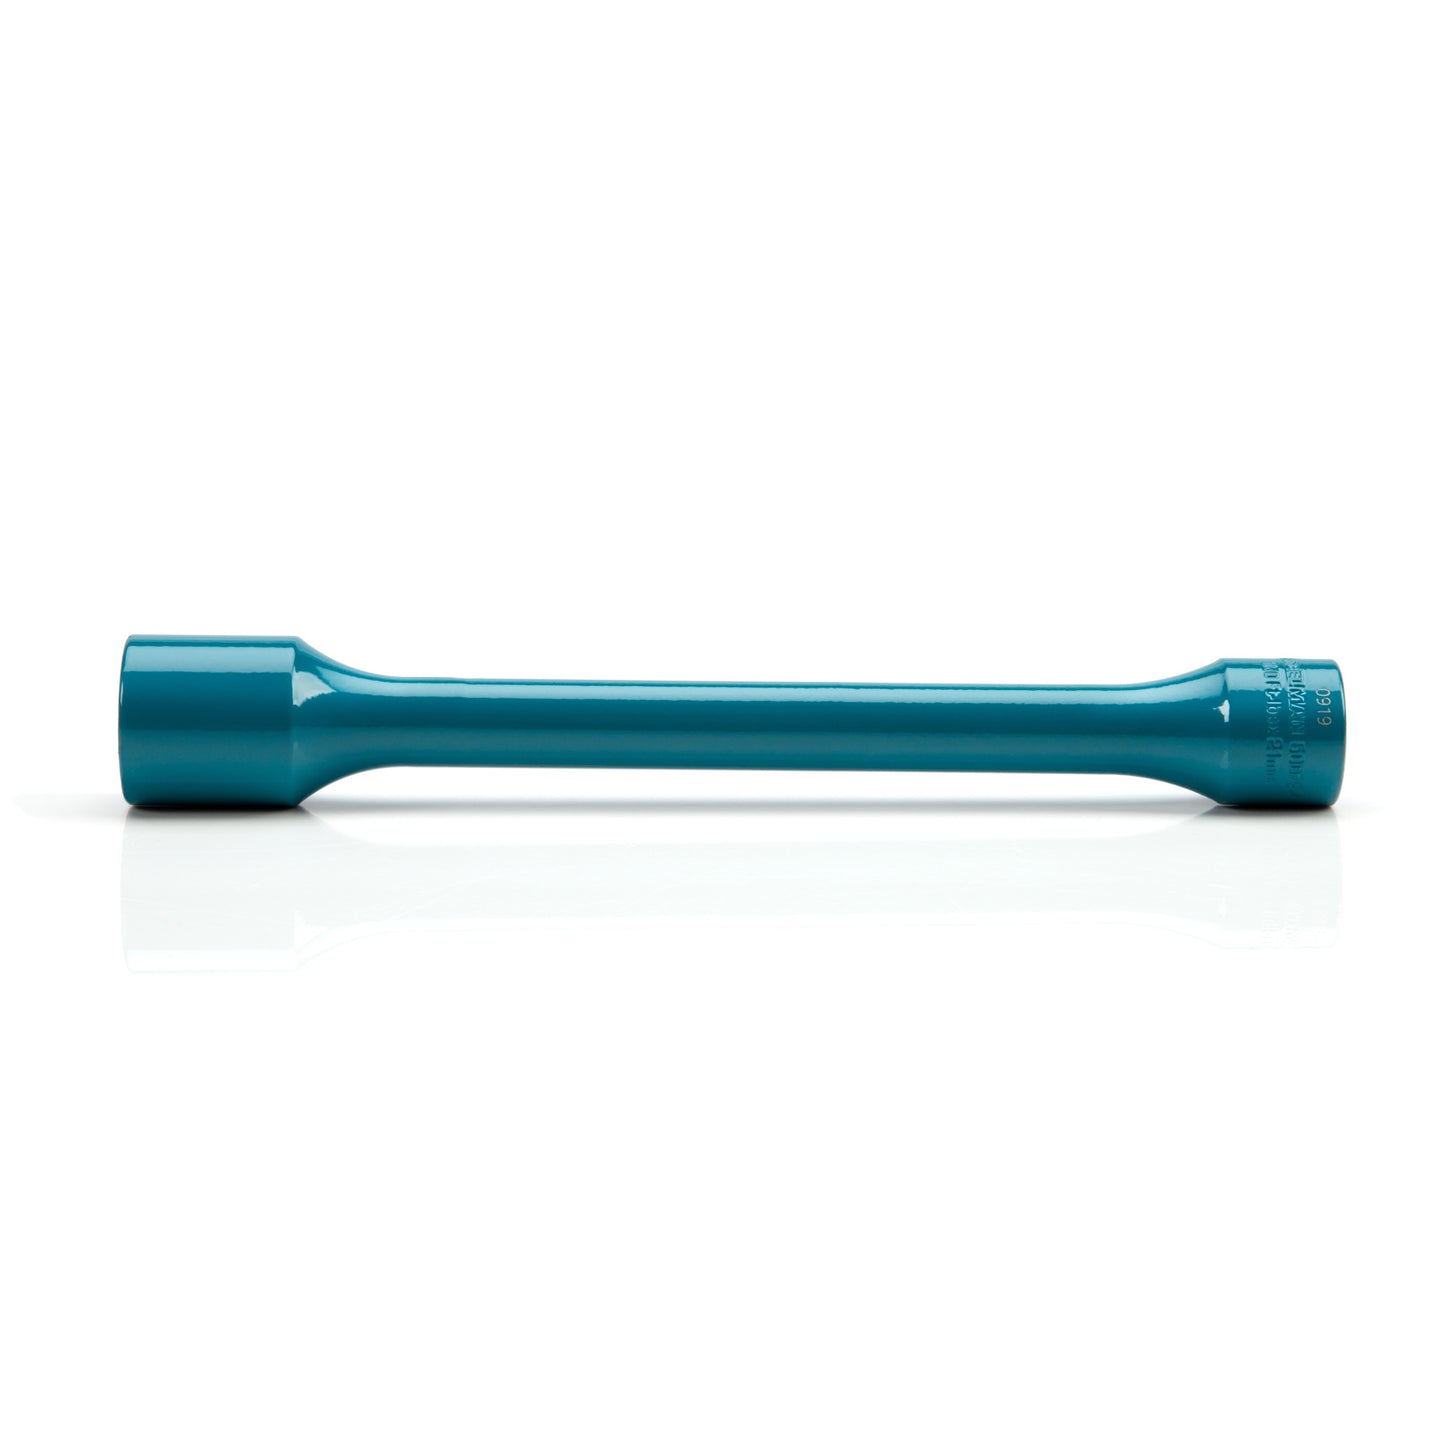 1/2-inch Drive x 21mm 150 ft-lb Torque Stick Extension - Turquoise